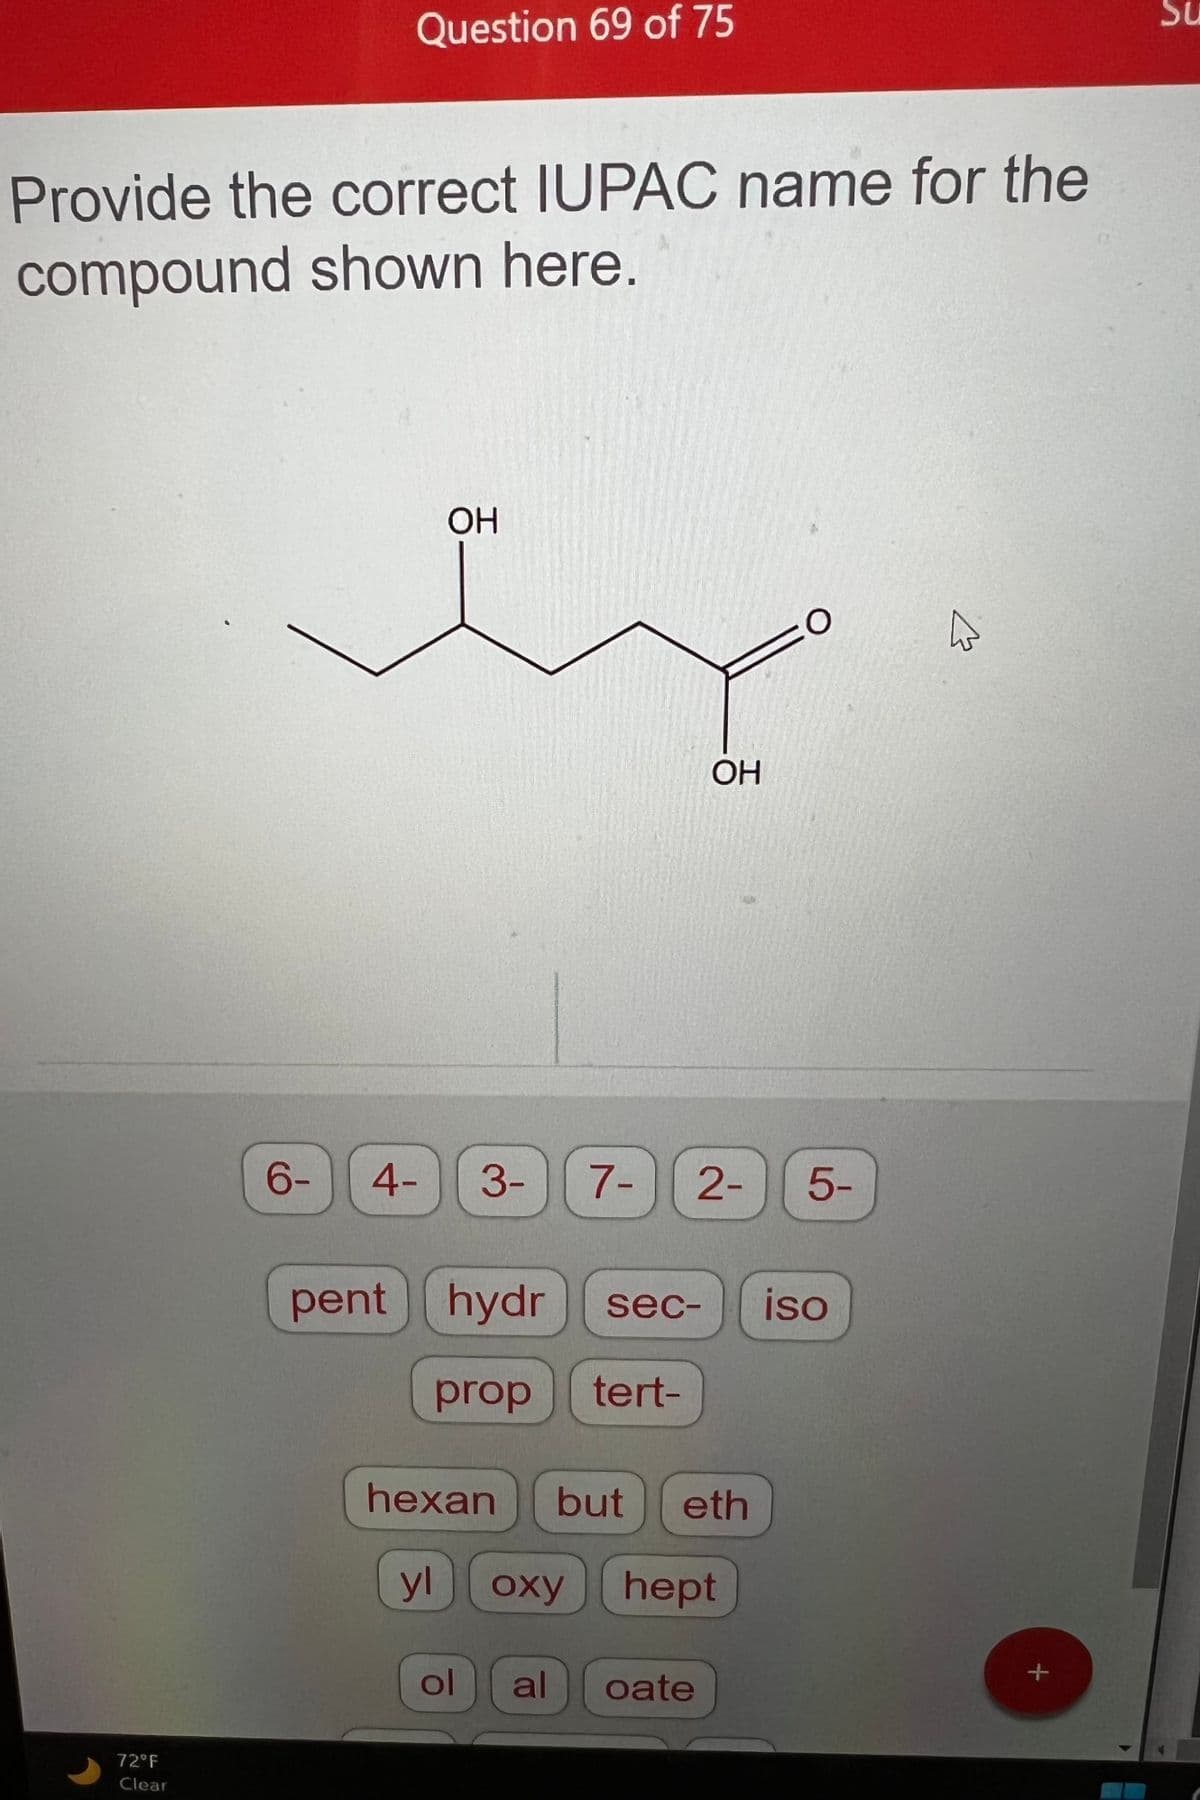 Provide the correct IUPAC name for the
compound shown here.
72°F
Clear
Question 69 of 75
6-
OH
pent hydr sec-
prop tert-
4- 3- 7- 2- 5-
hexan but eth
yl
ol
OH
oxy hept
al
oate
O
iso
^
+
0
Su